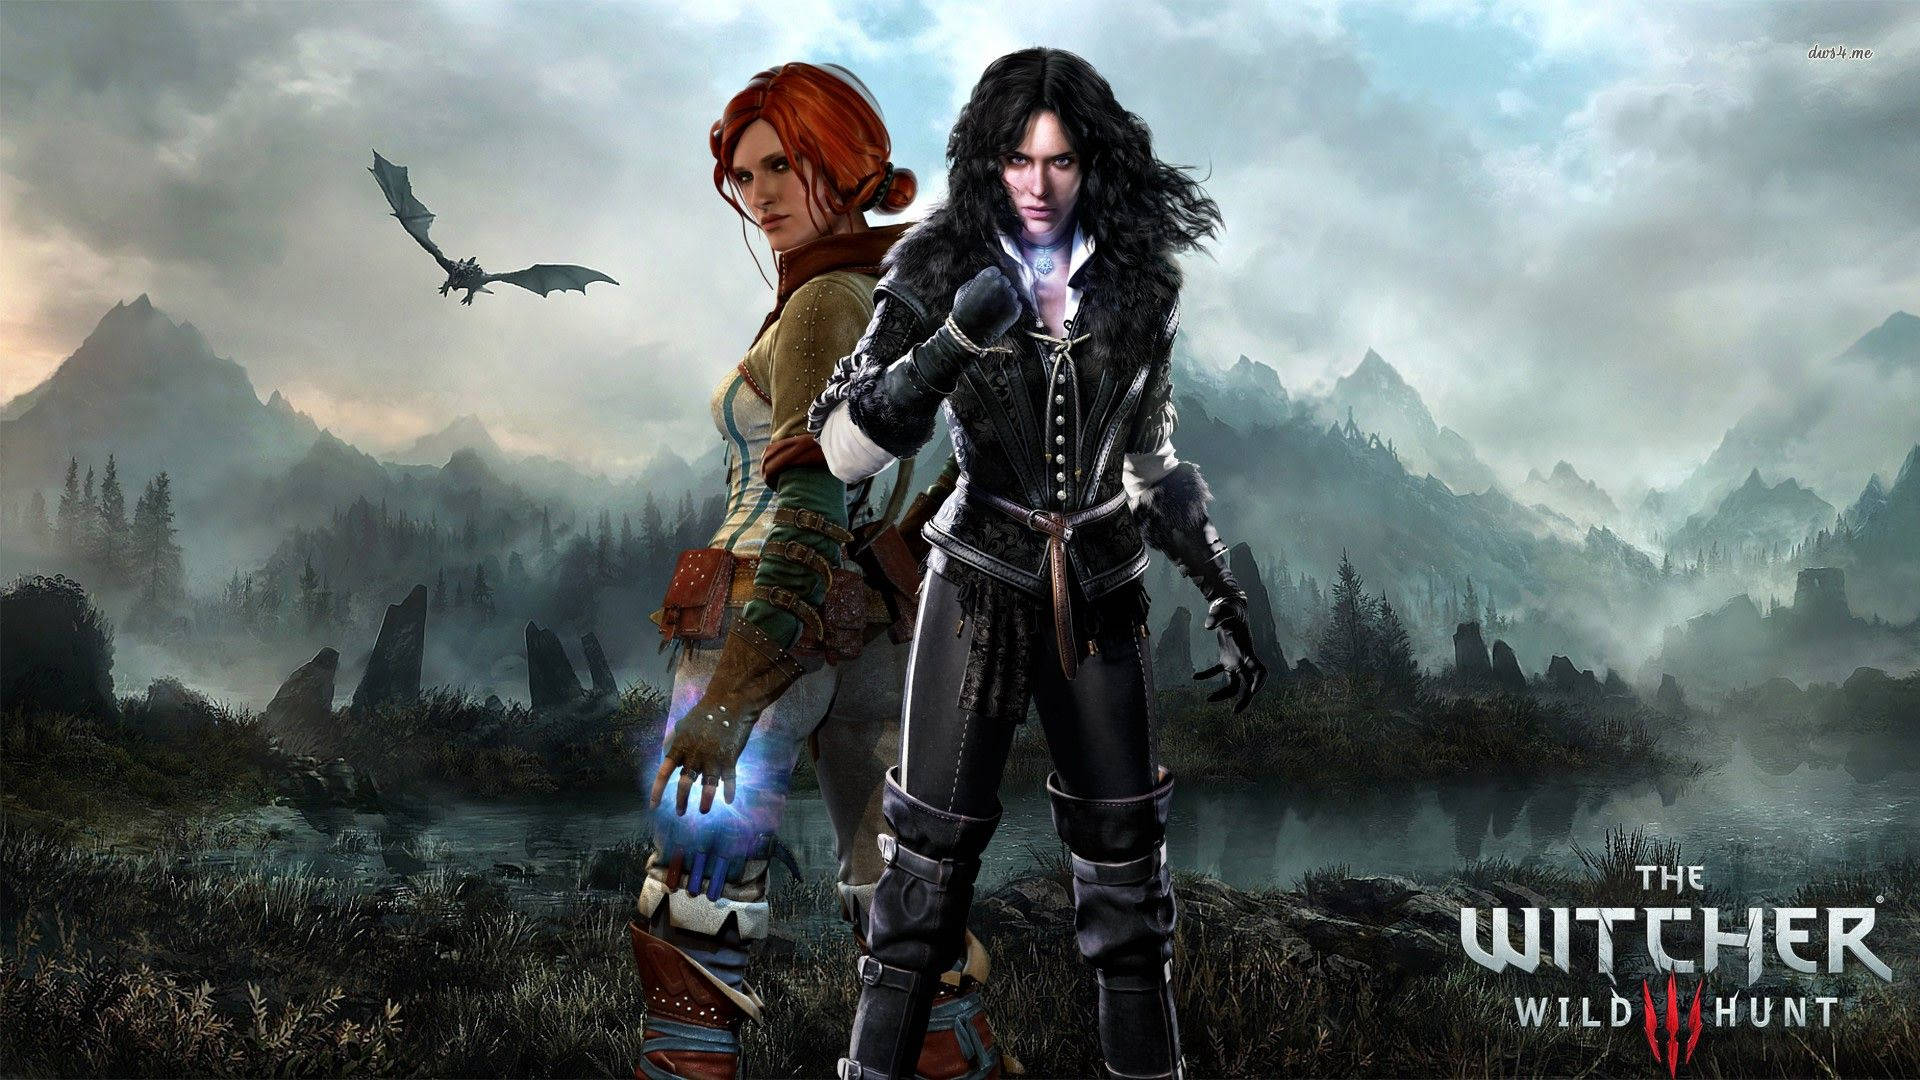 The Witcher Triss And Yennefer Poster